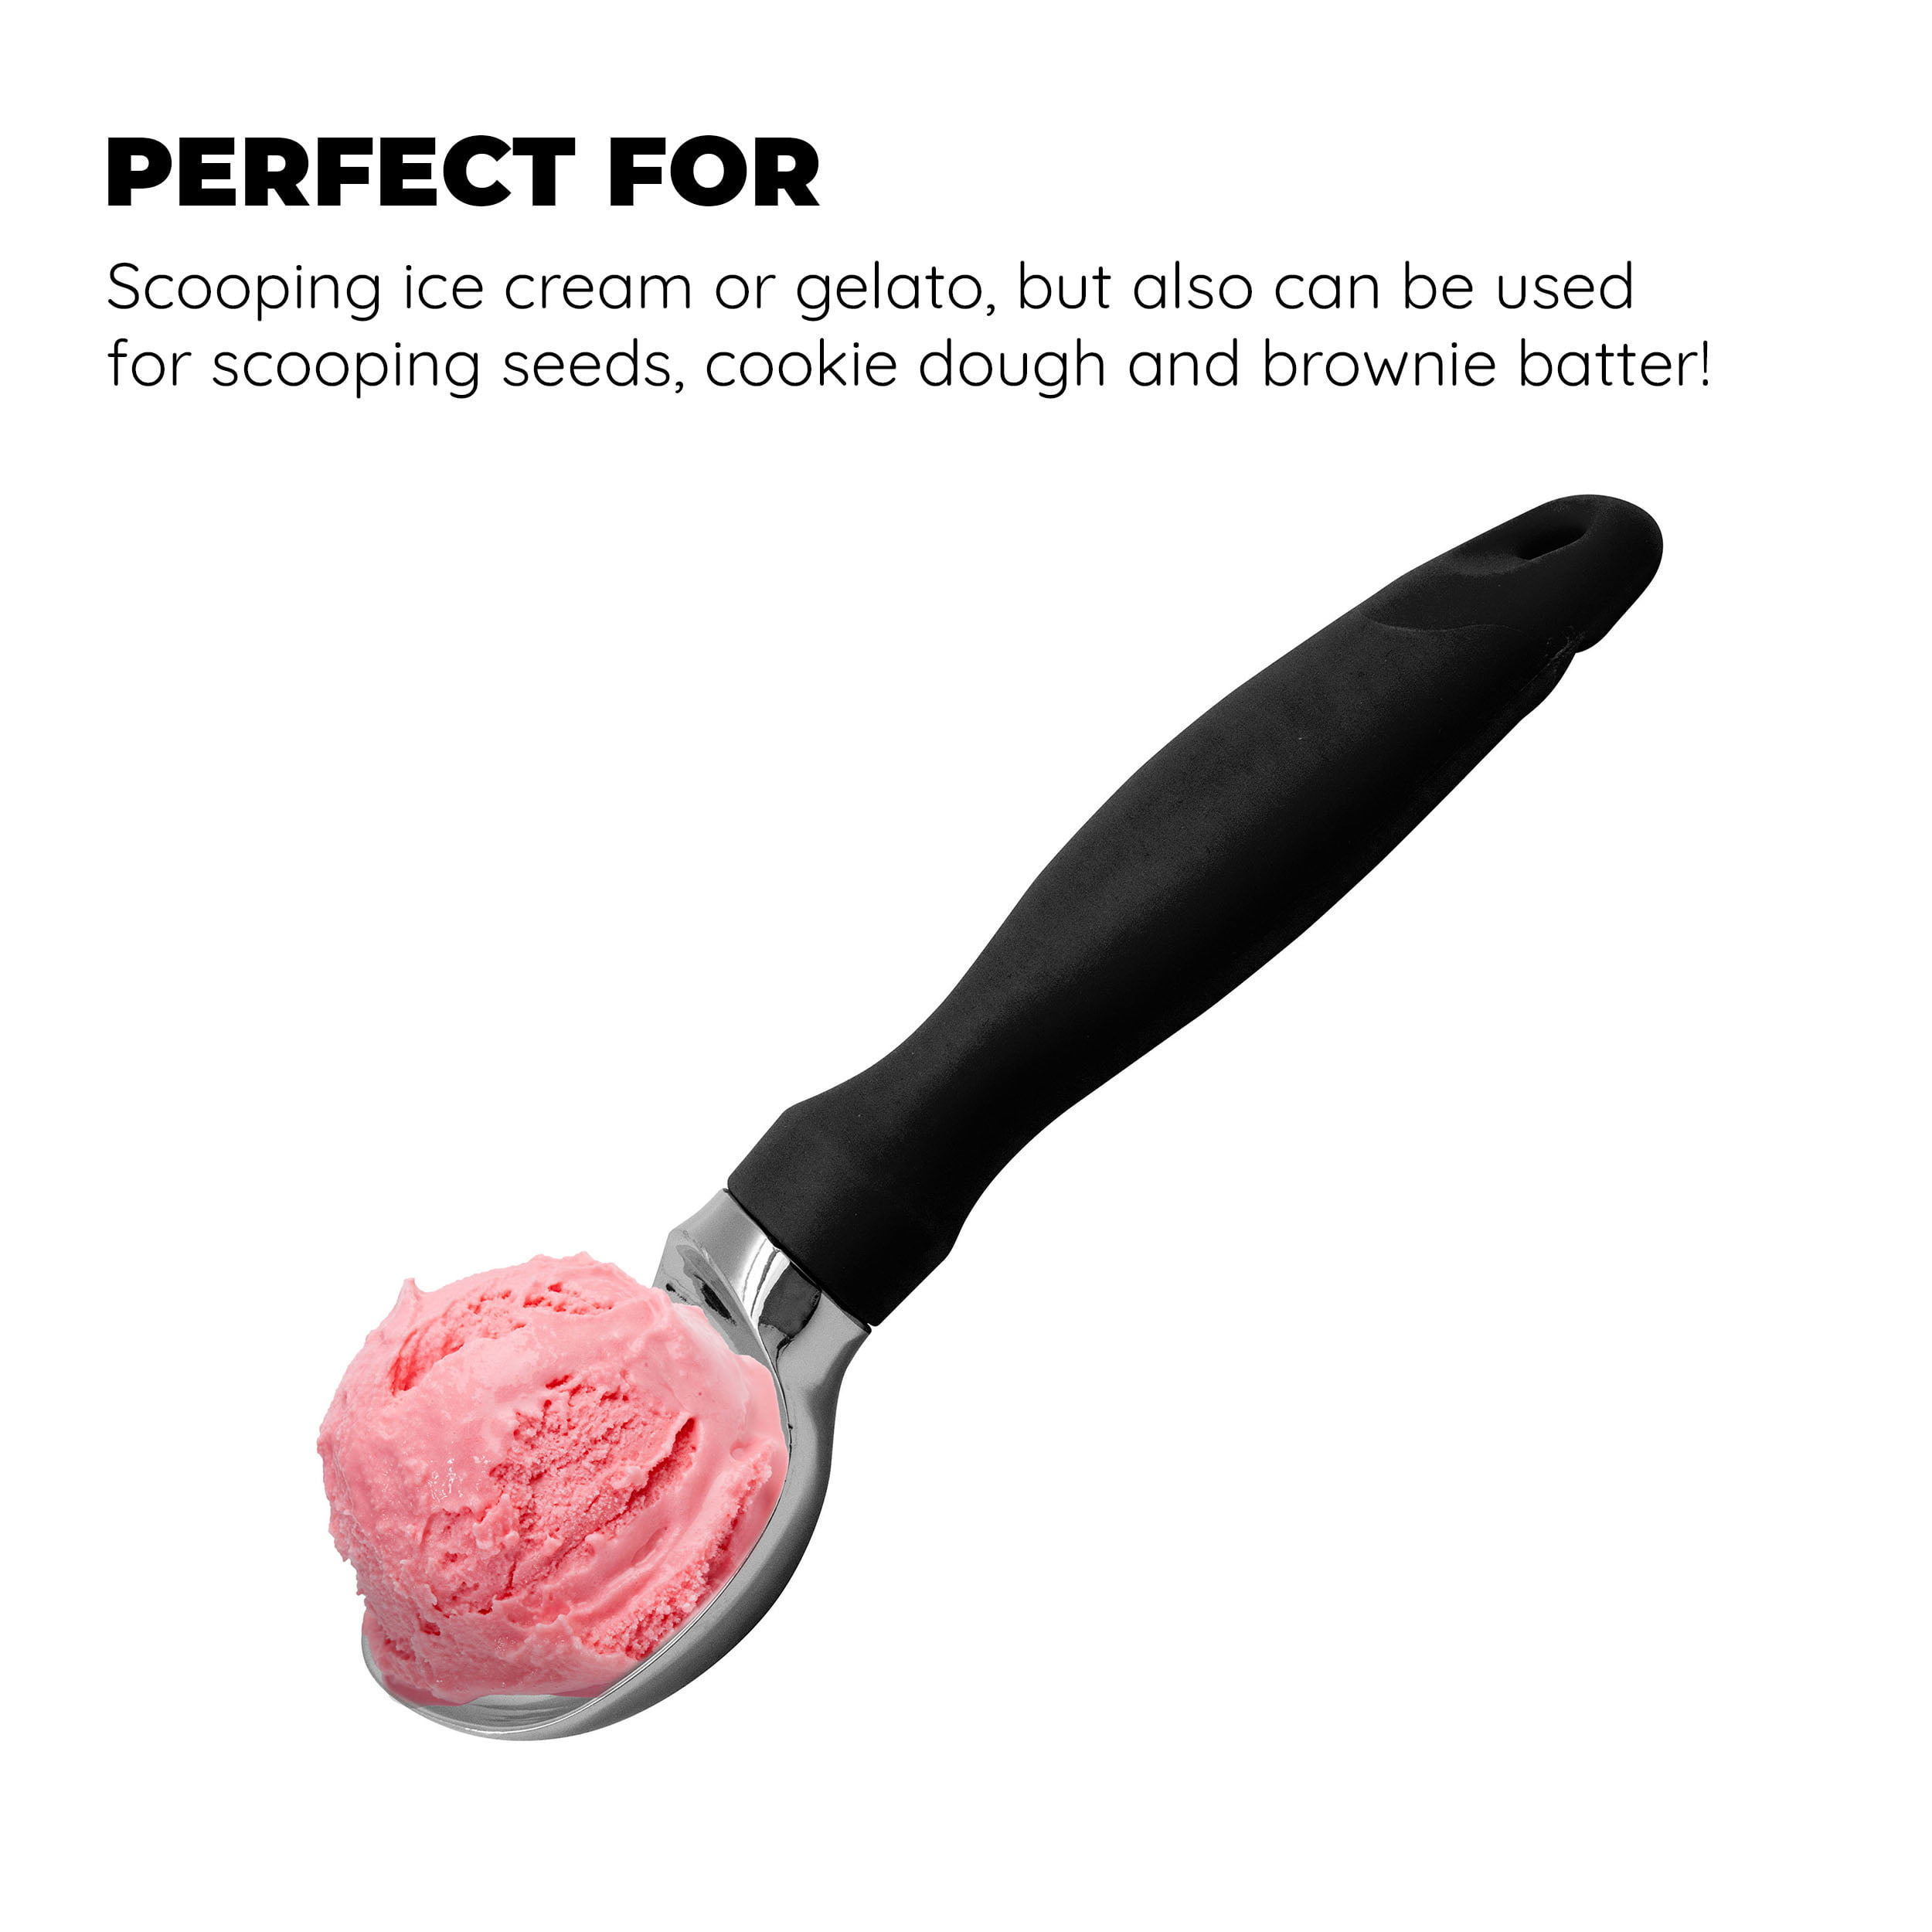 Mainstay Heavy Duty Plastic Ice Cream Scoop You Choose (Black, Teal, or Red)